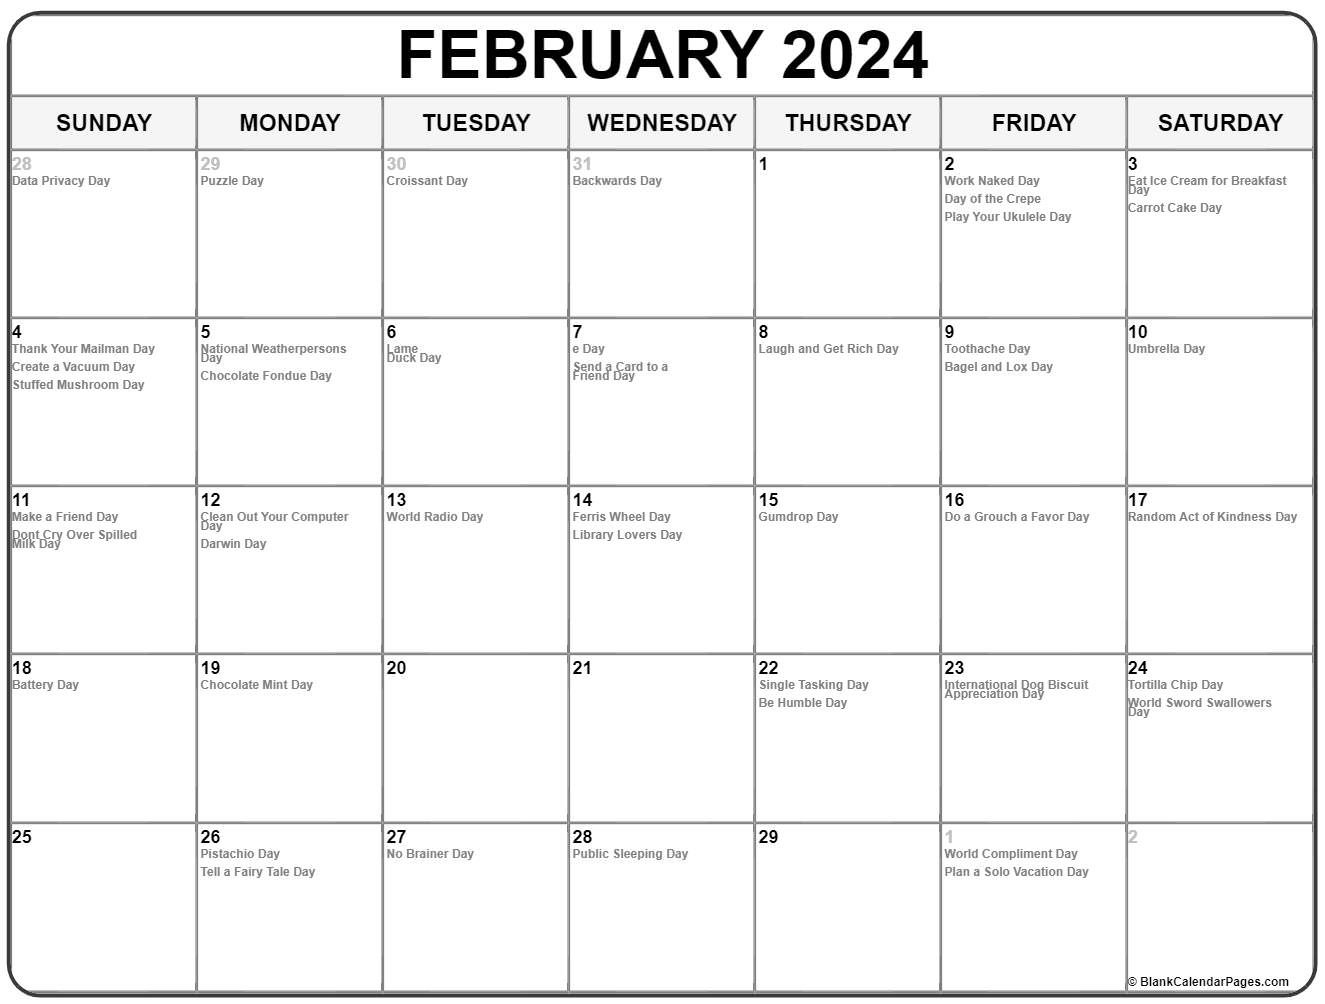 Collection Of February 2020 Calendars With Holidays